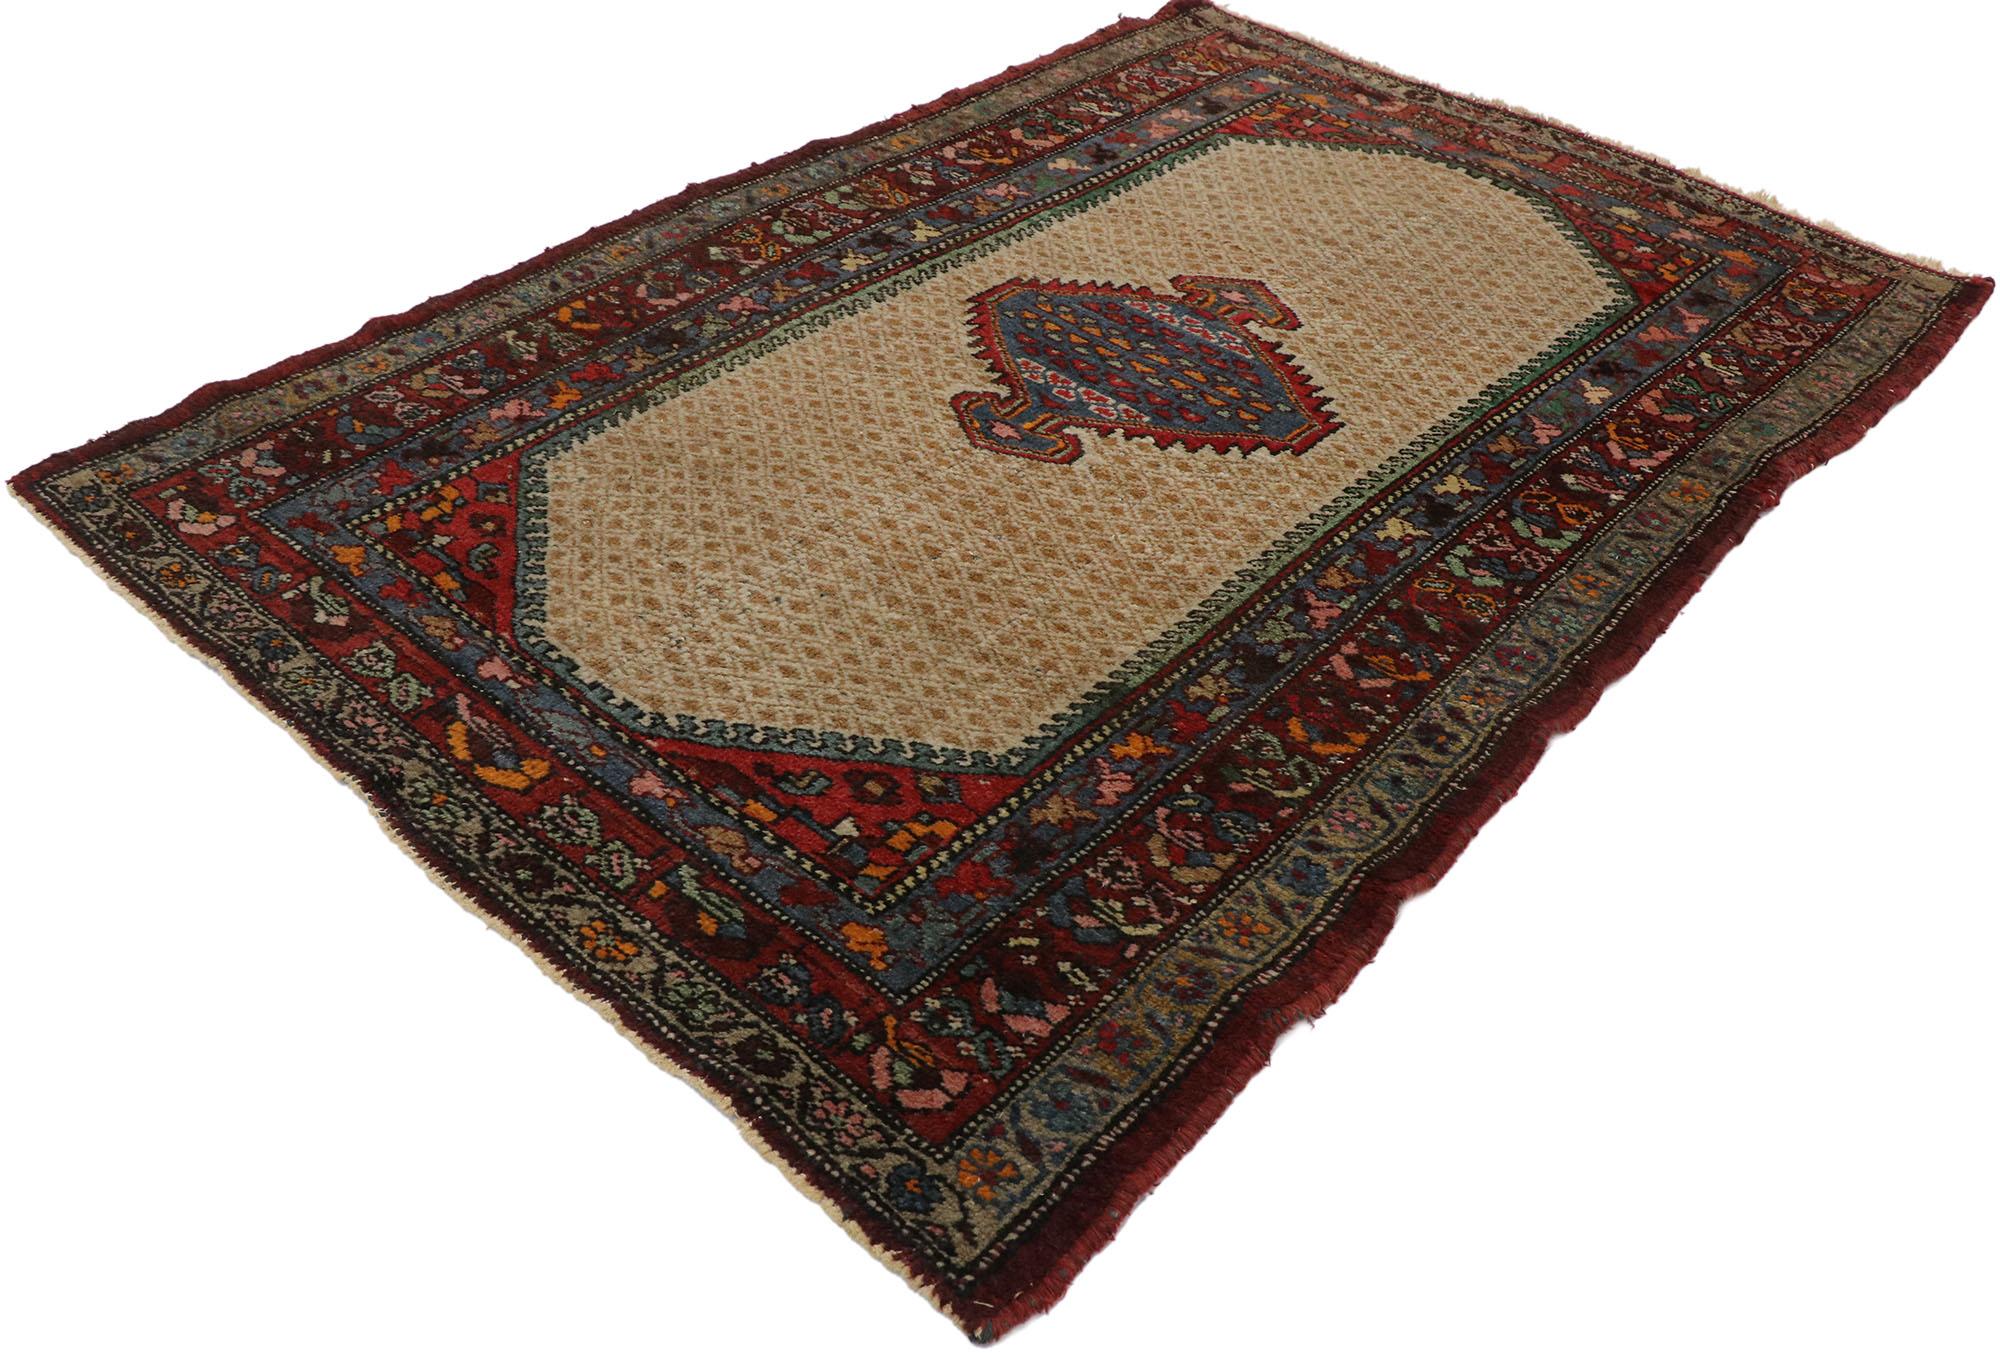 77568, antique Persian Hamadan rug with Arts & Crafts style. This hand knotted wool antique Persian Hamadan rug features a serrated hexagonal medallion with anchor pendants floating in the center of an abrashed patterned field. The medallion,